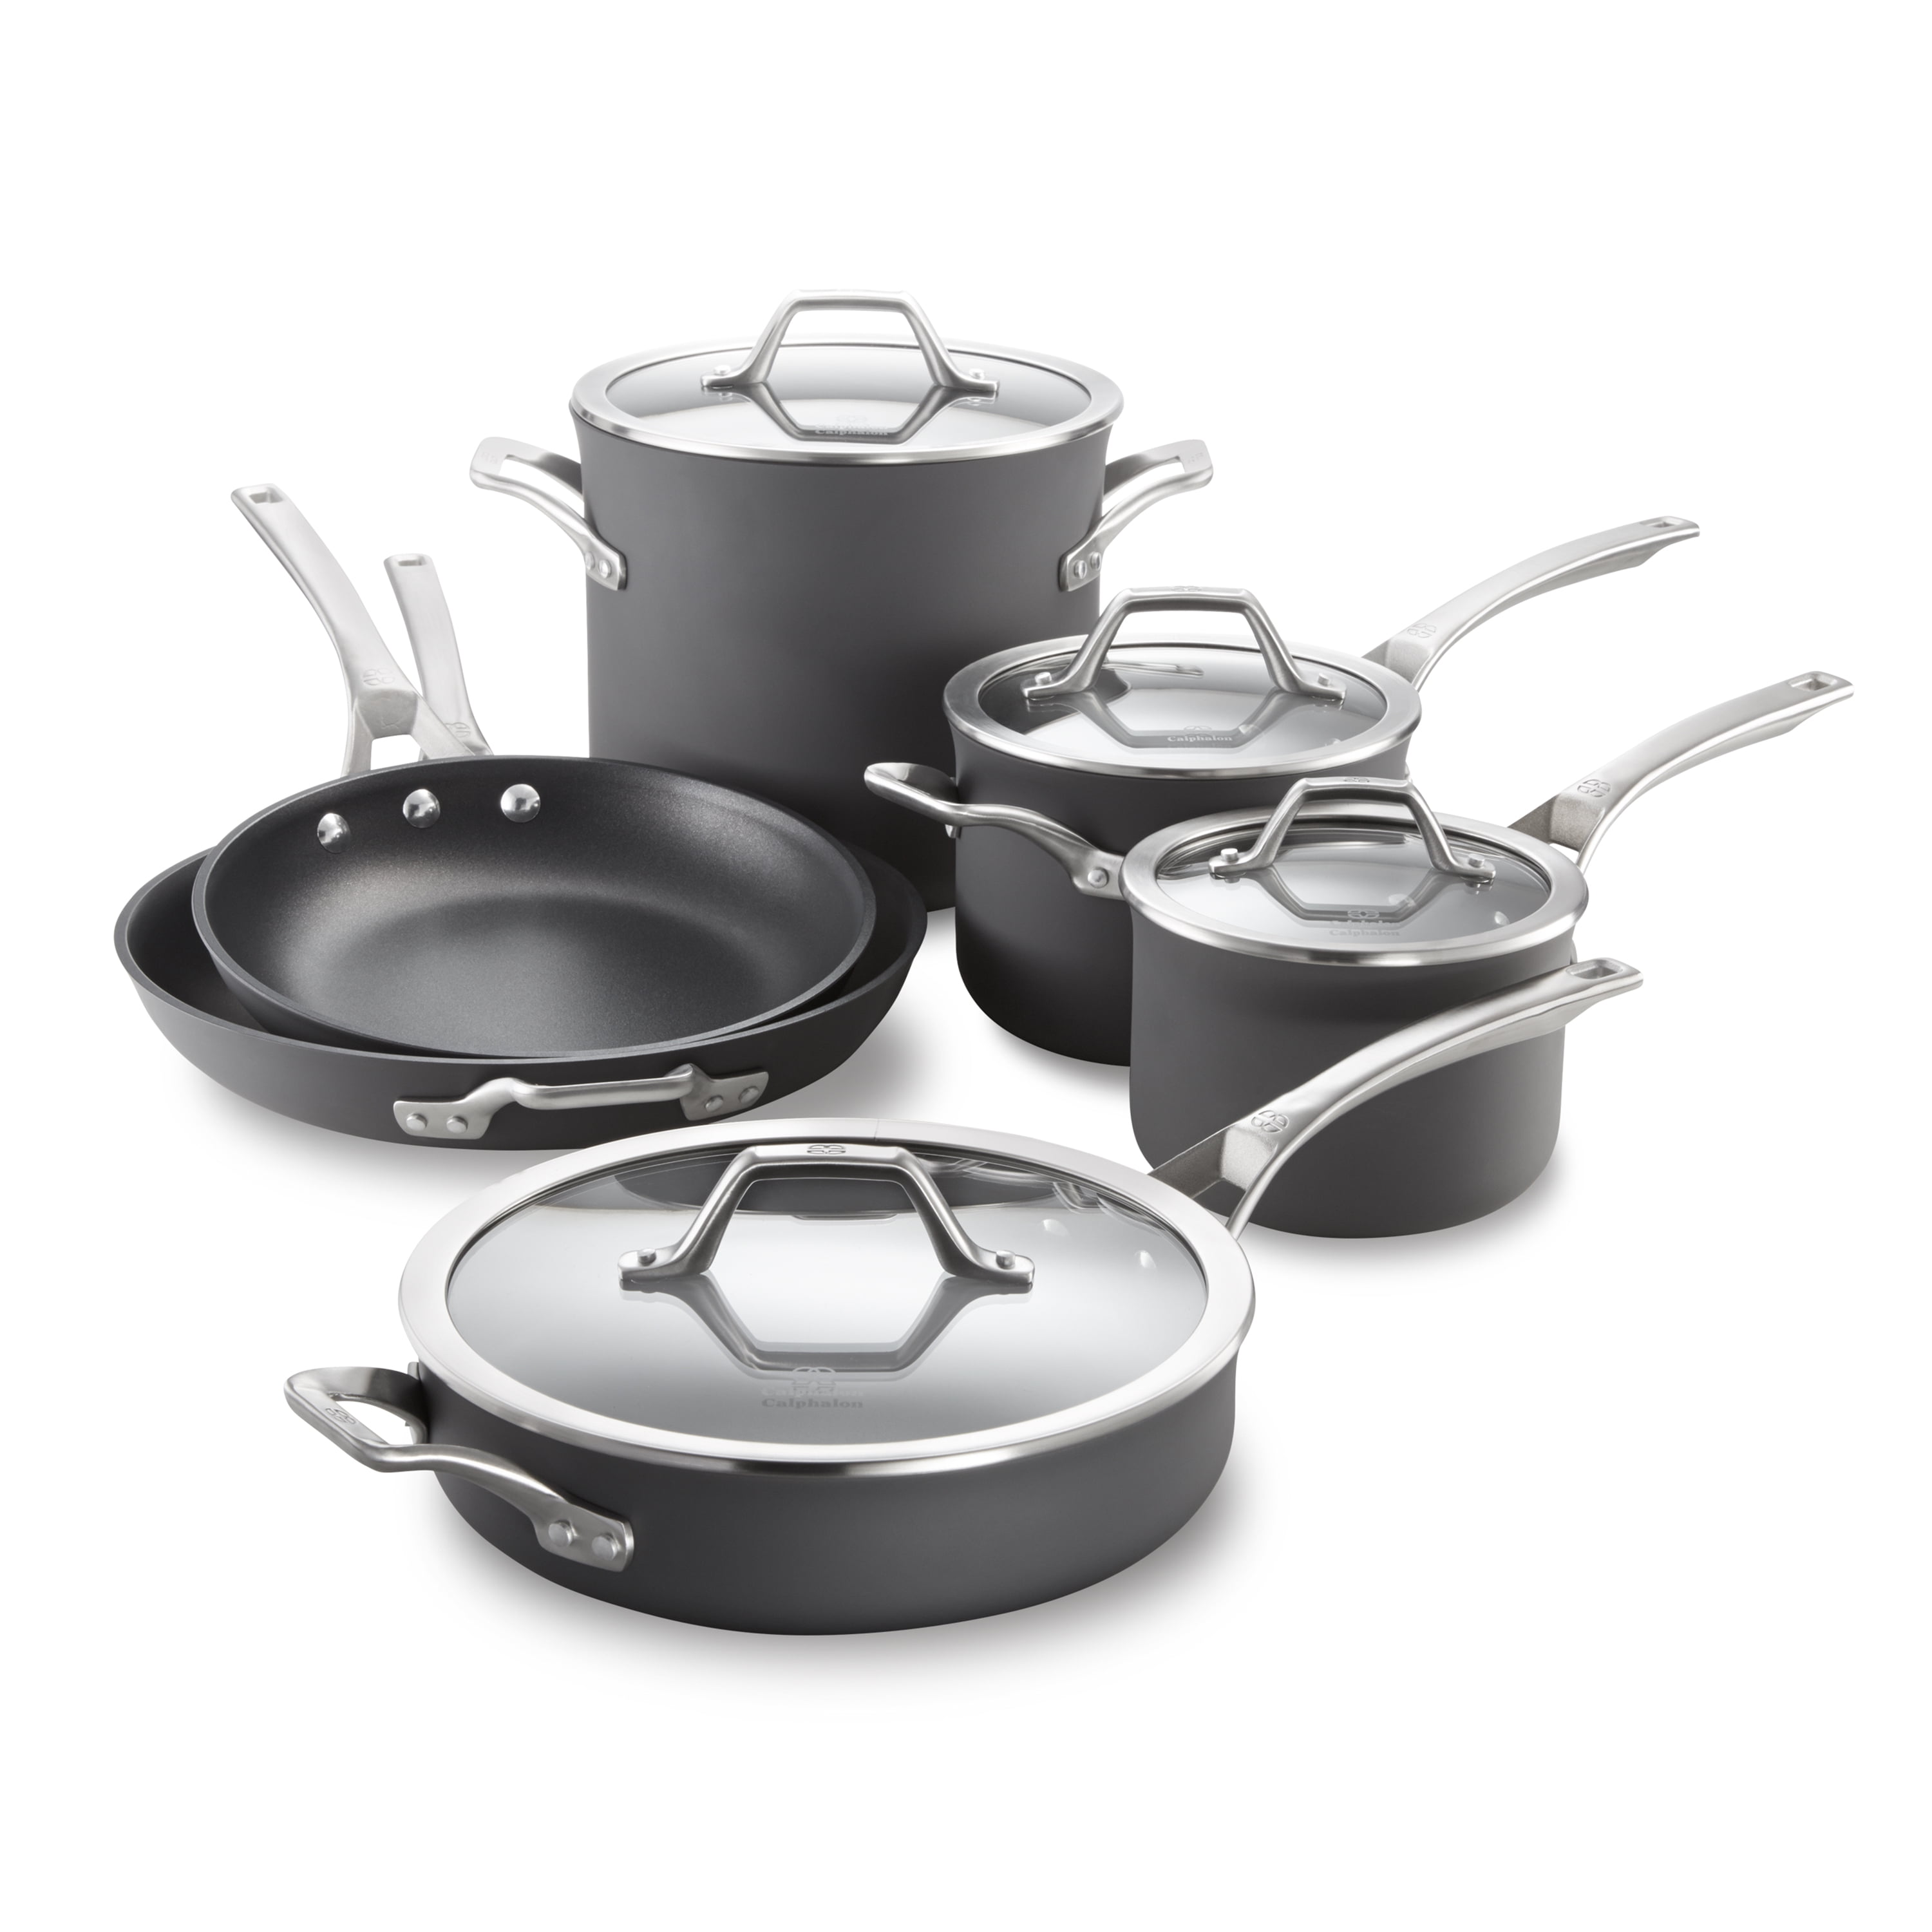 Calphalon Classic Nonstick 14 Piece Pots and Pans Cookware Set With BPA free No-Boil-Over Inserts Stay Cool Metal Handles Glass Lids